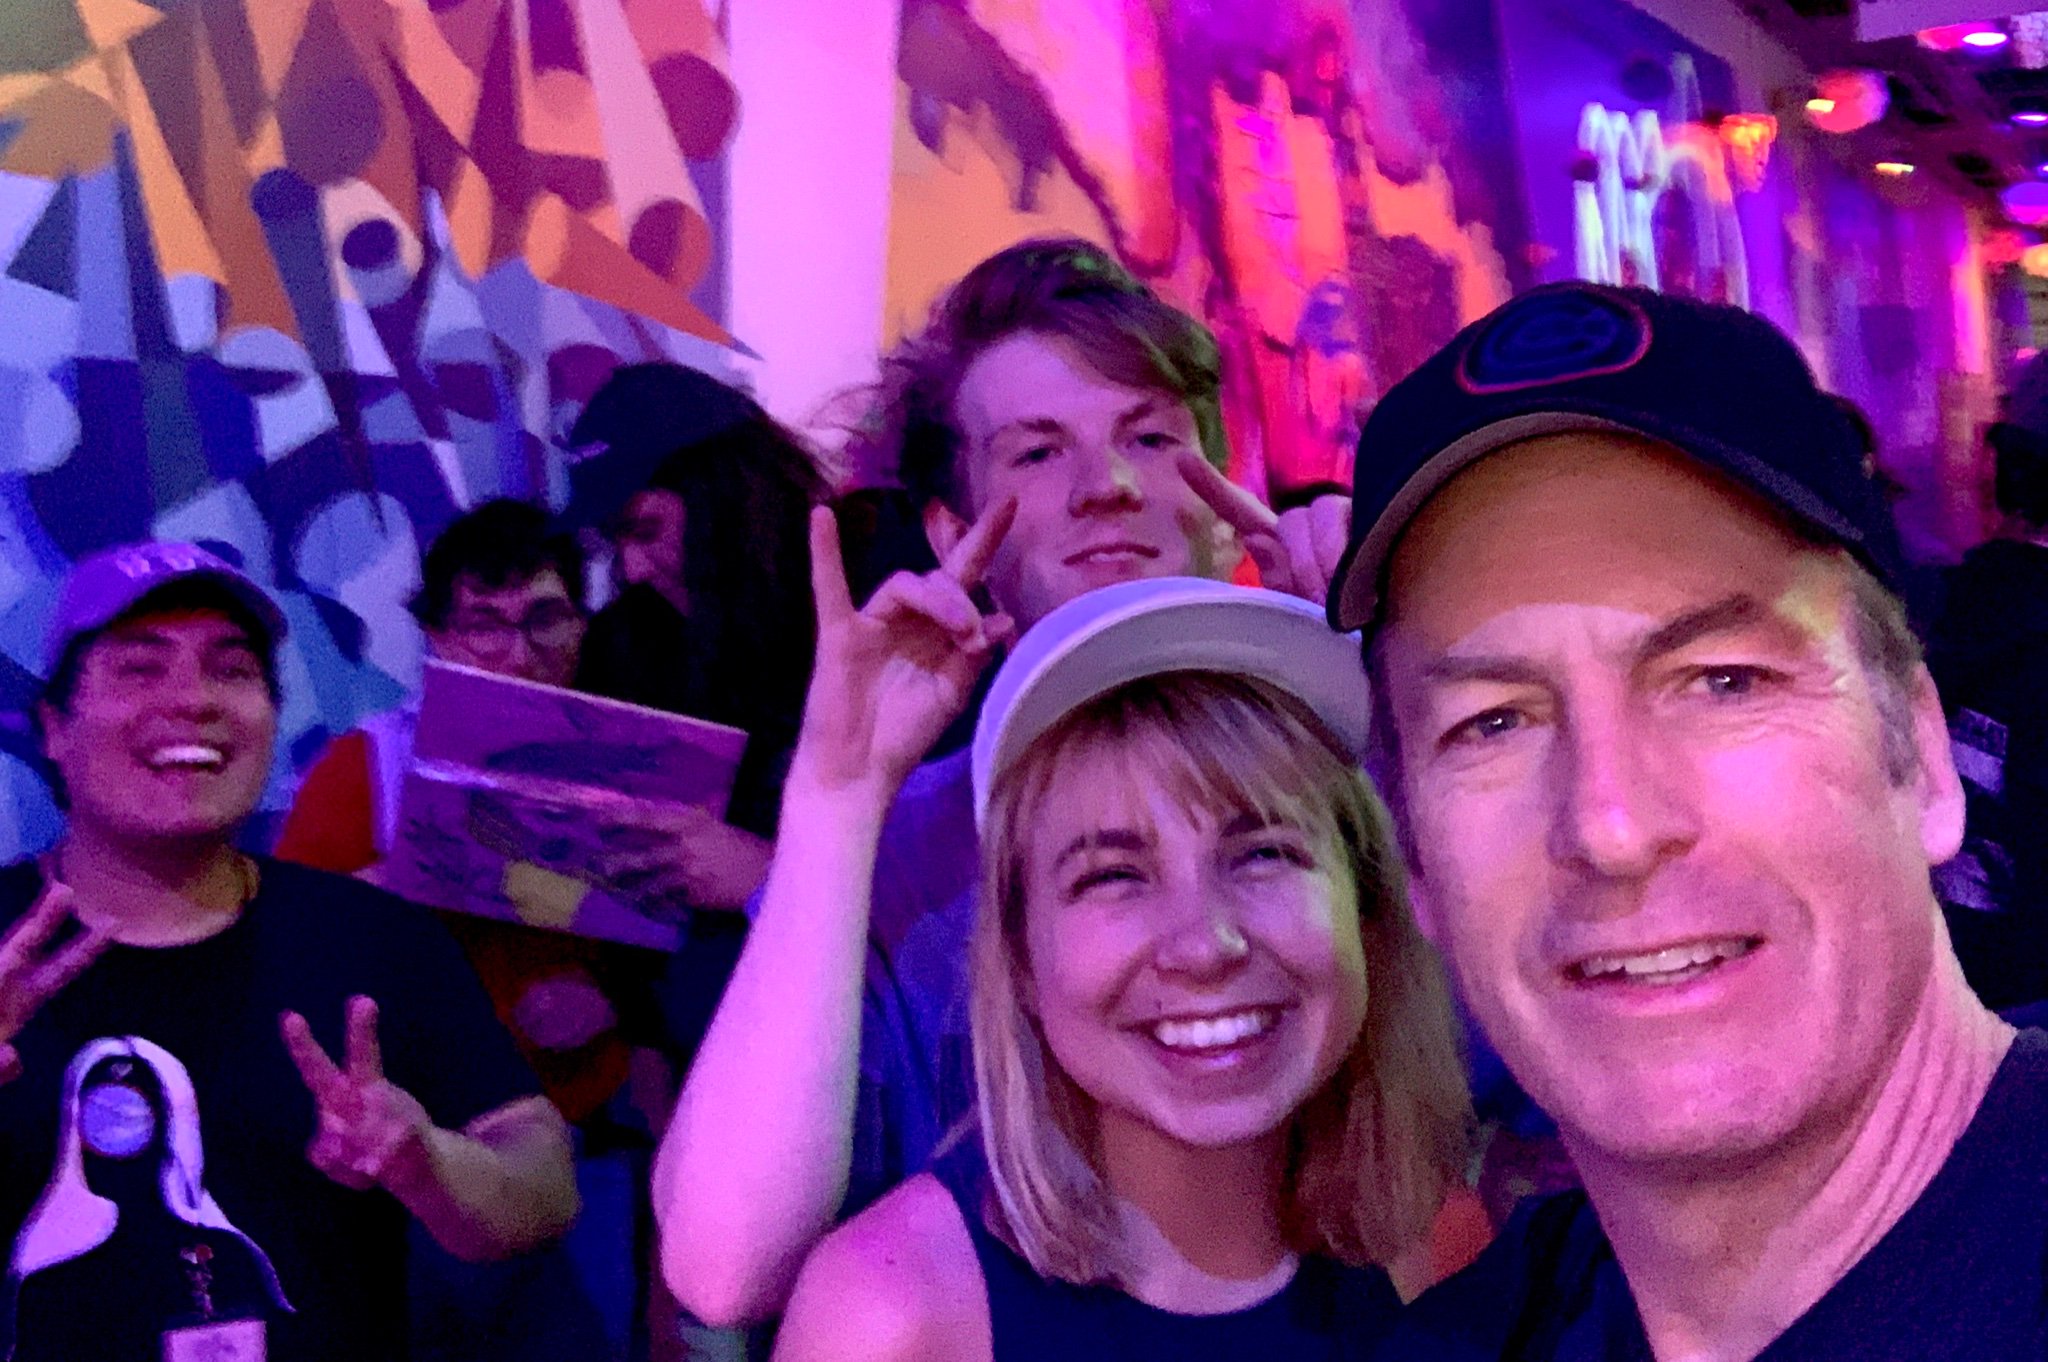 Mr Bob Odenkirk On Twitter Just Saw My Fave New Chicago Band Beach Bunny At The Supercool Meow Wolf In Santa Fe Fun Me Lucky - beach bunny prom queen roblox id code